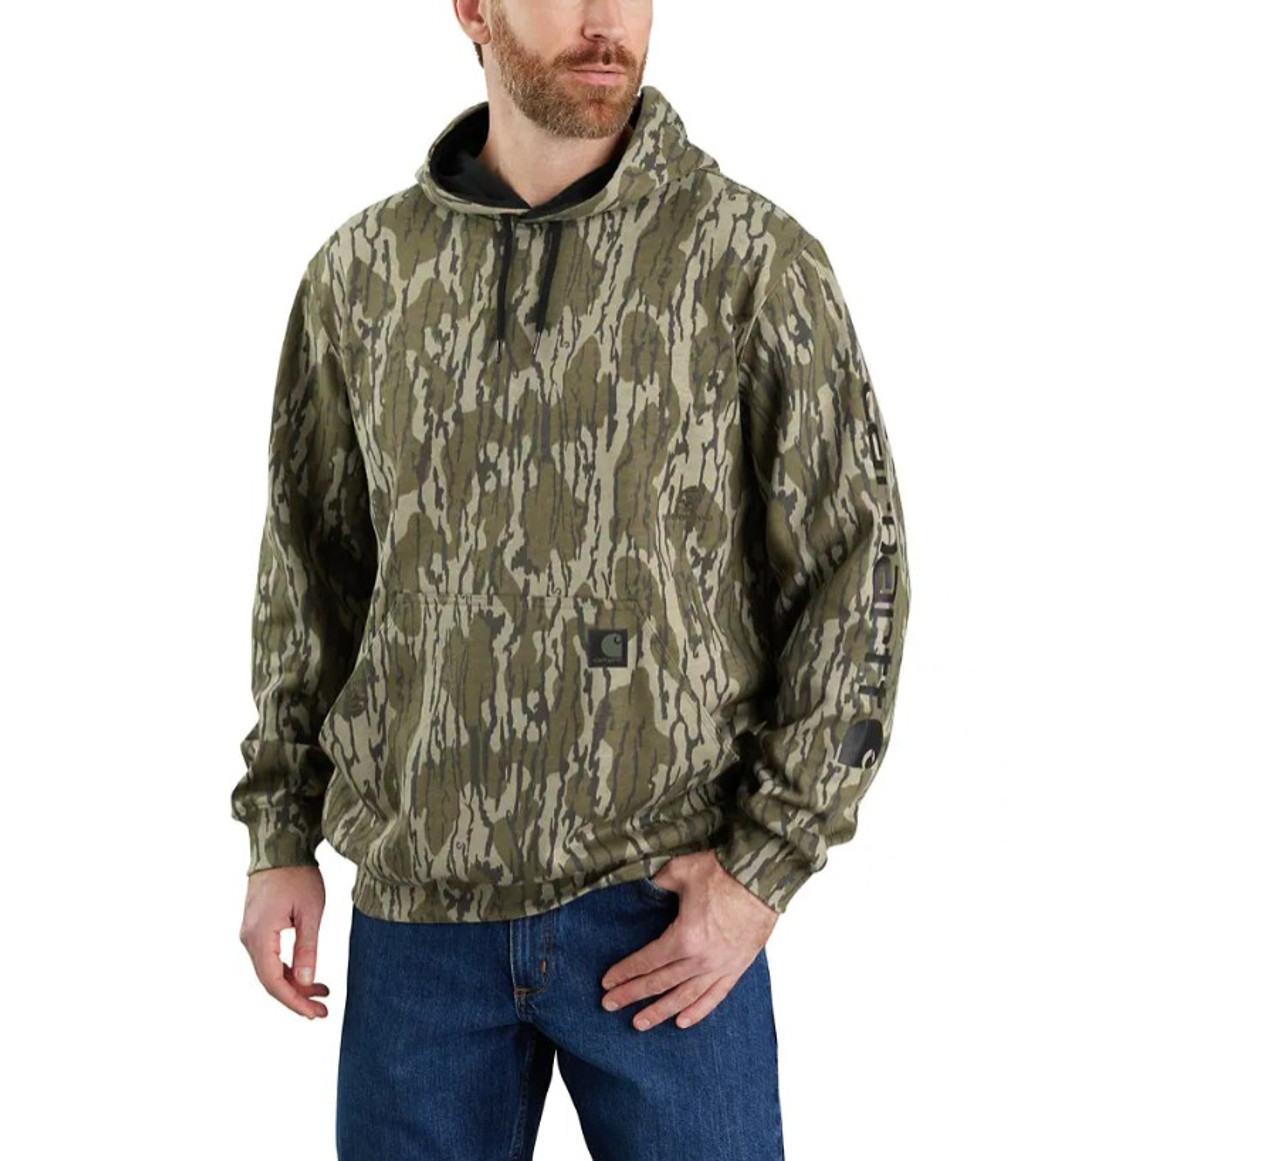  Banded Men's Hunting Mid-Layer Fleece Full Zip Vest,  Bottomland, Medium : Clothing, Shoes & Jewelry